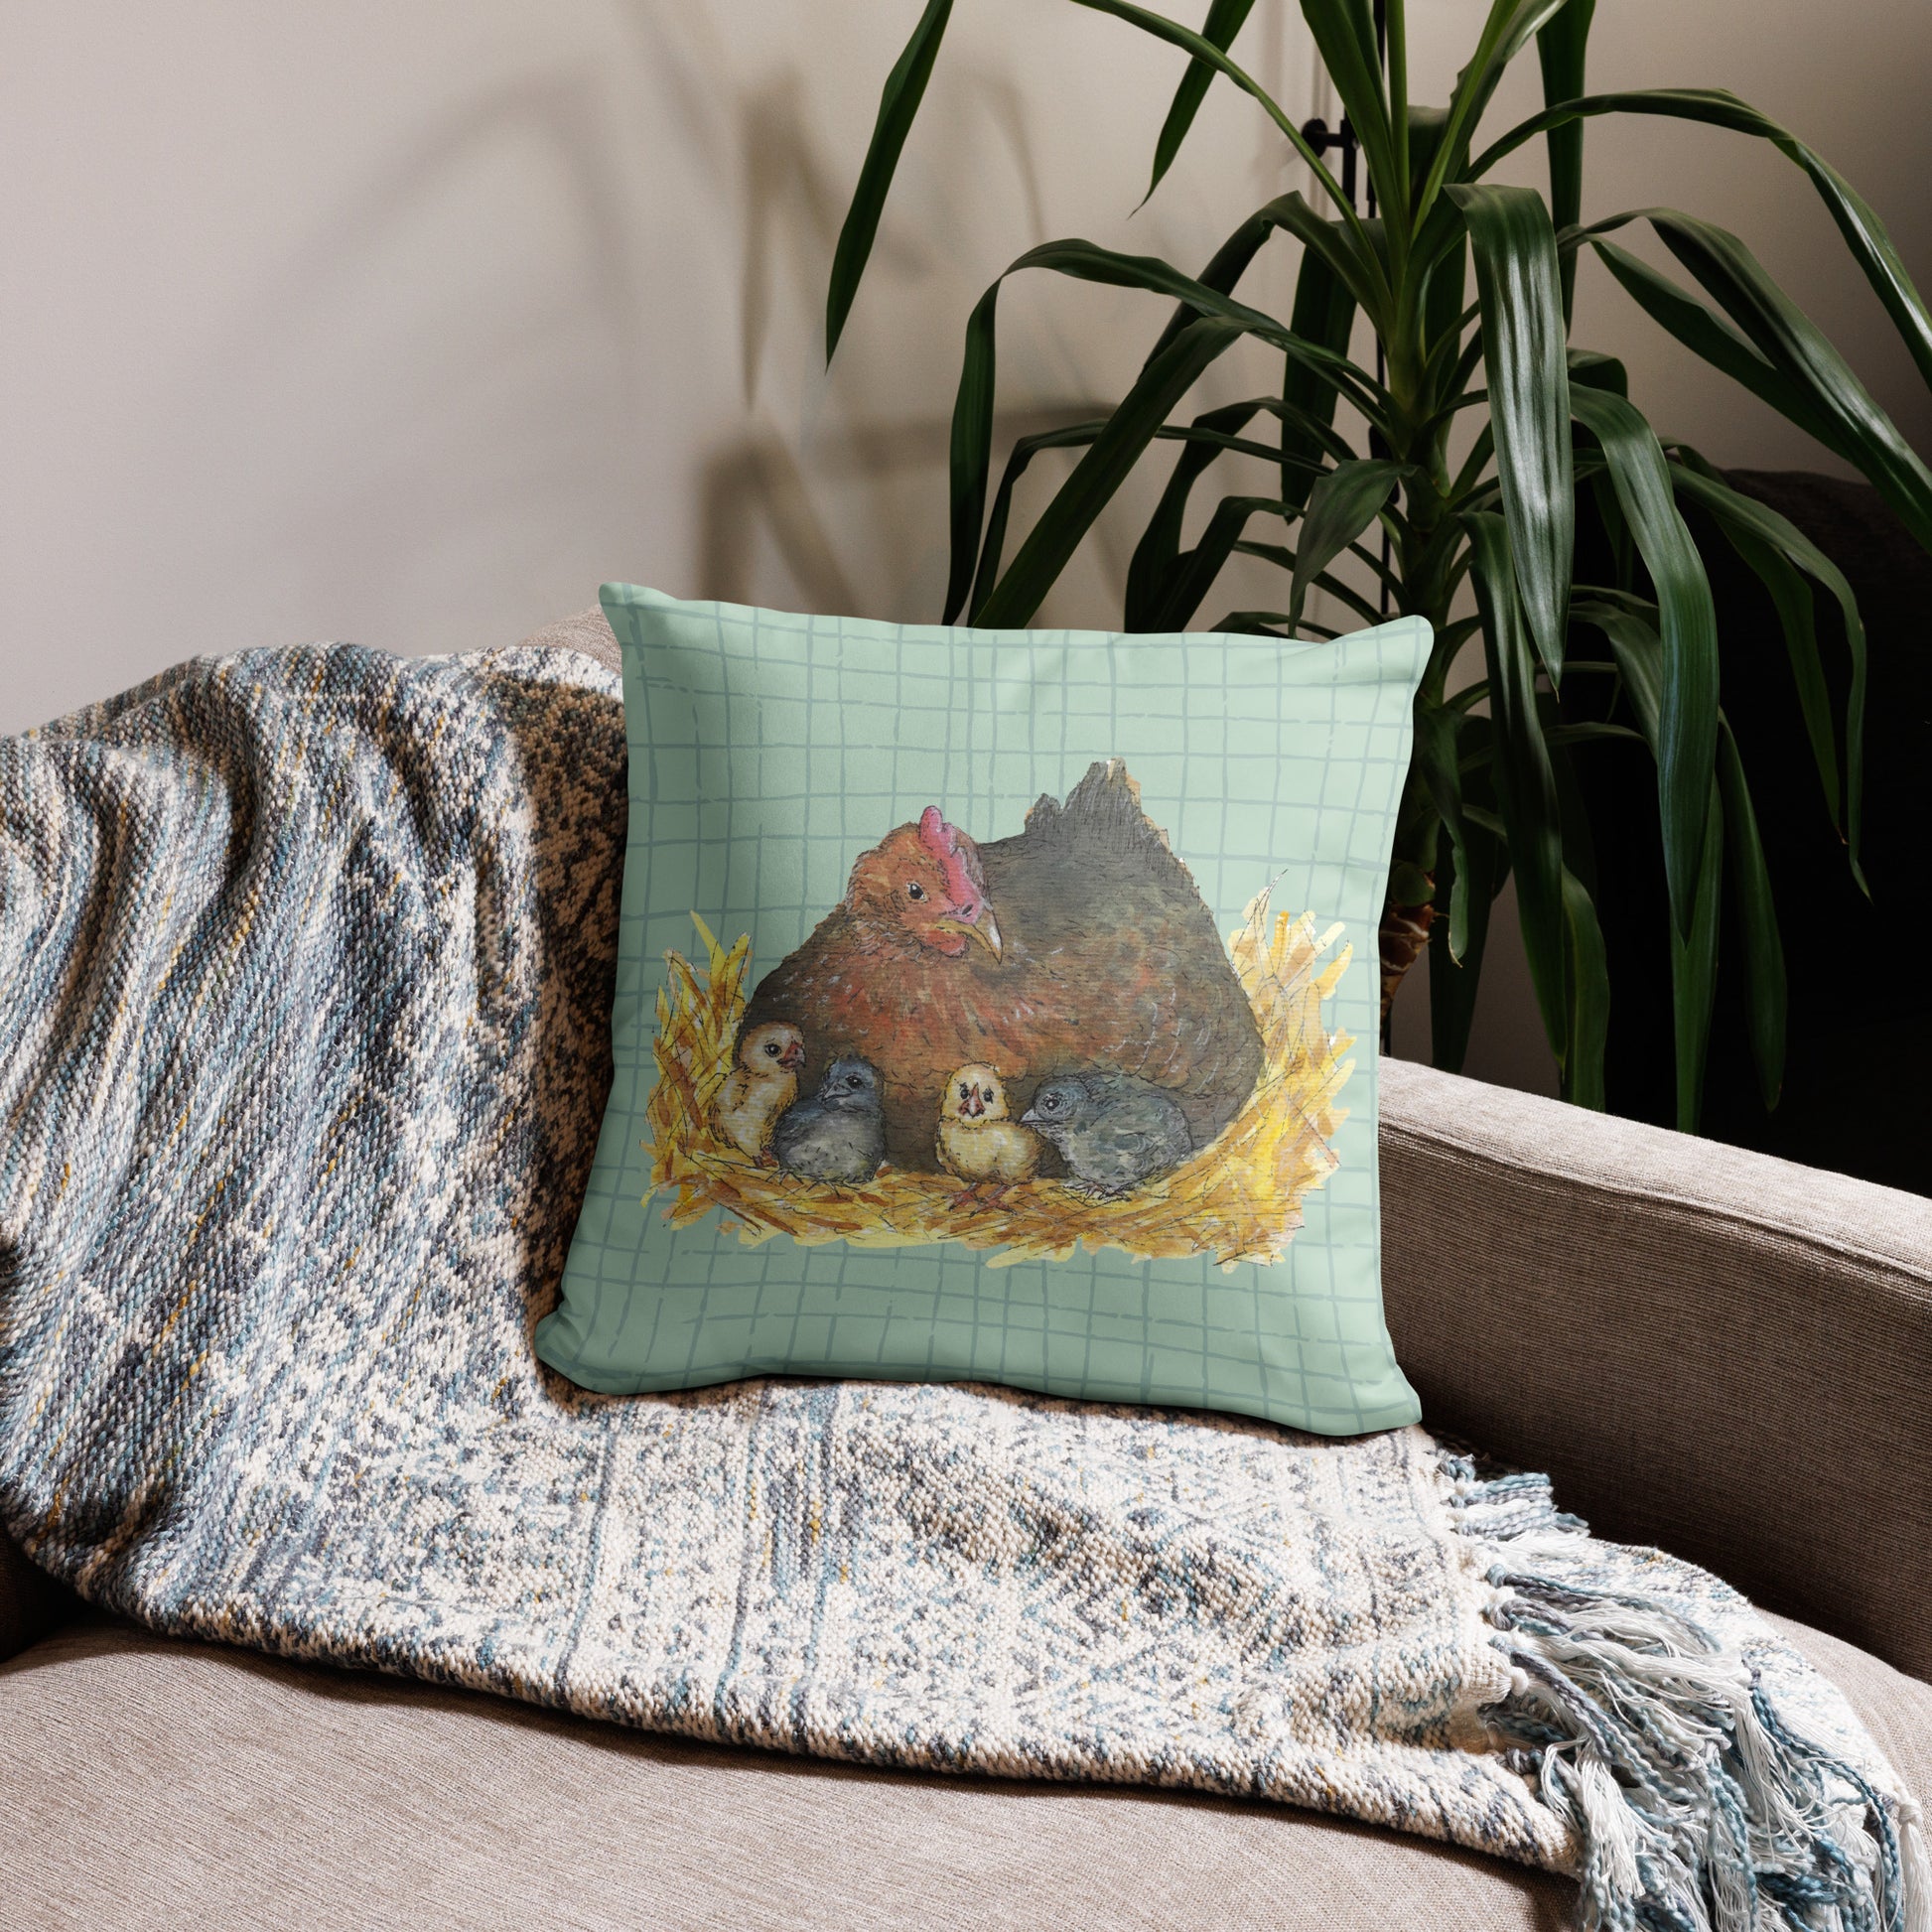 18 by 18 inch mother hen decorative throw pillow. Features Heather Silver's watercolor print of a mother hen and chicks on a green cross-hatched background. Image printed on both sides. Has a hidden zipper and washable cover. Comes with shape-retaining insert. Shown on throw blanket by potted plant.